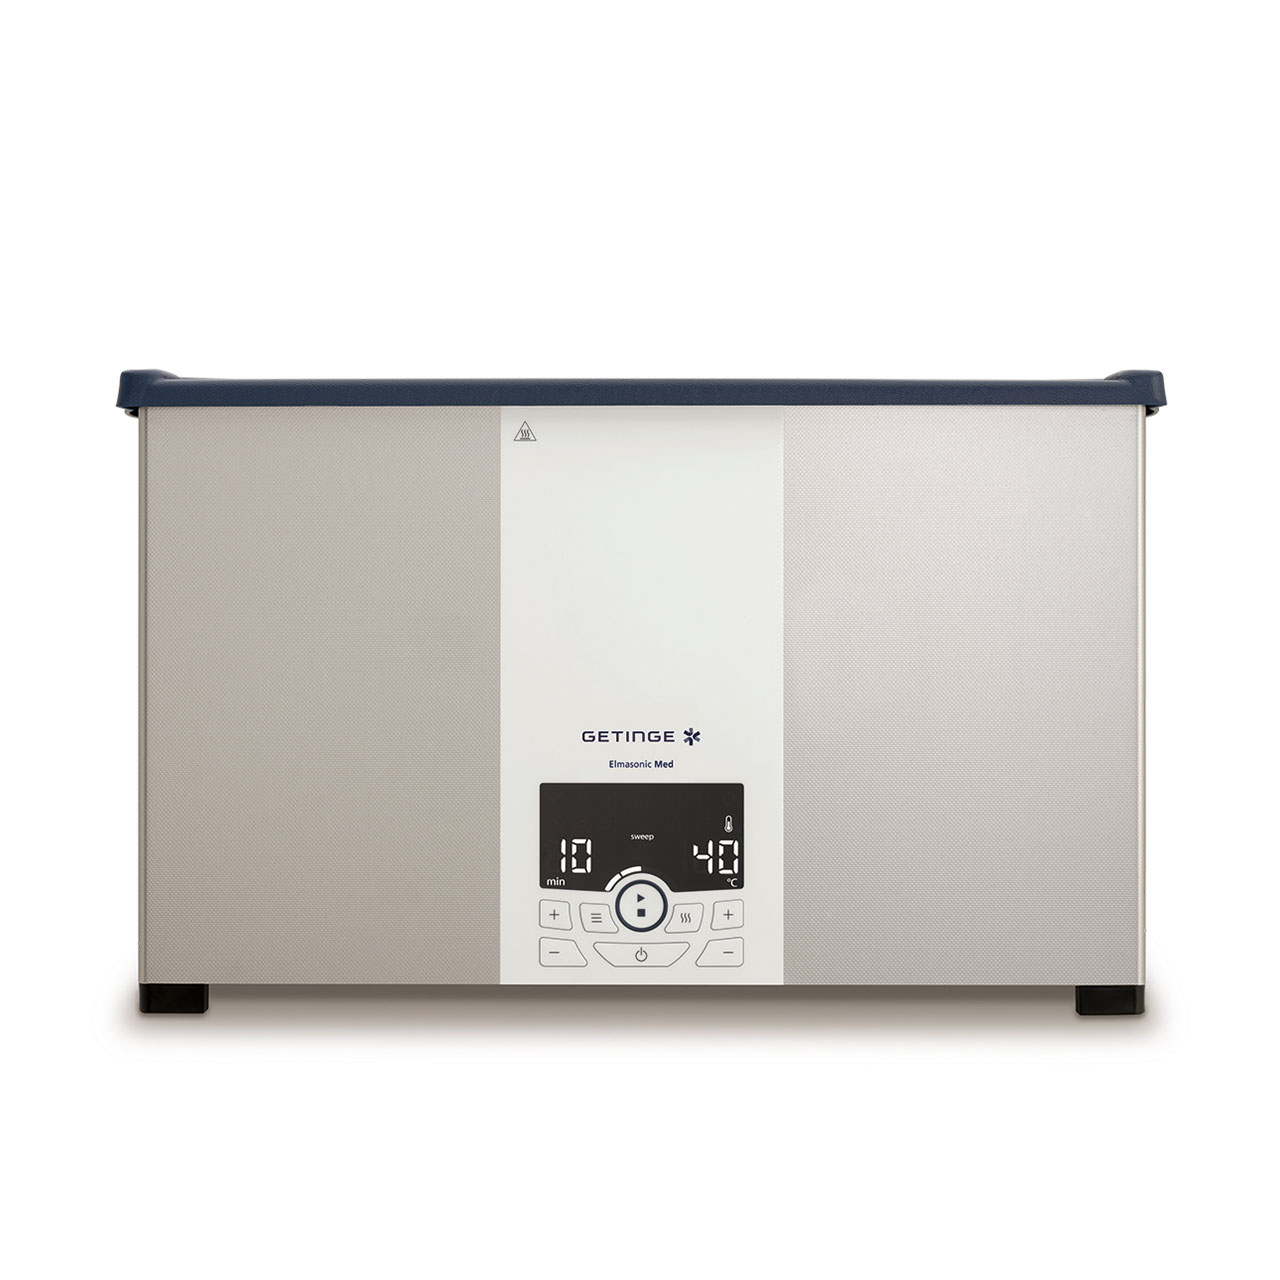 Getinge Elmasonic Med Ultrasonic Cleaning Units comes with modern design with easy-to-clean stainless steel surfaces 